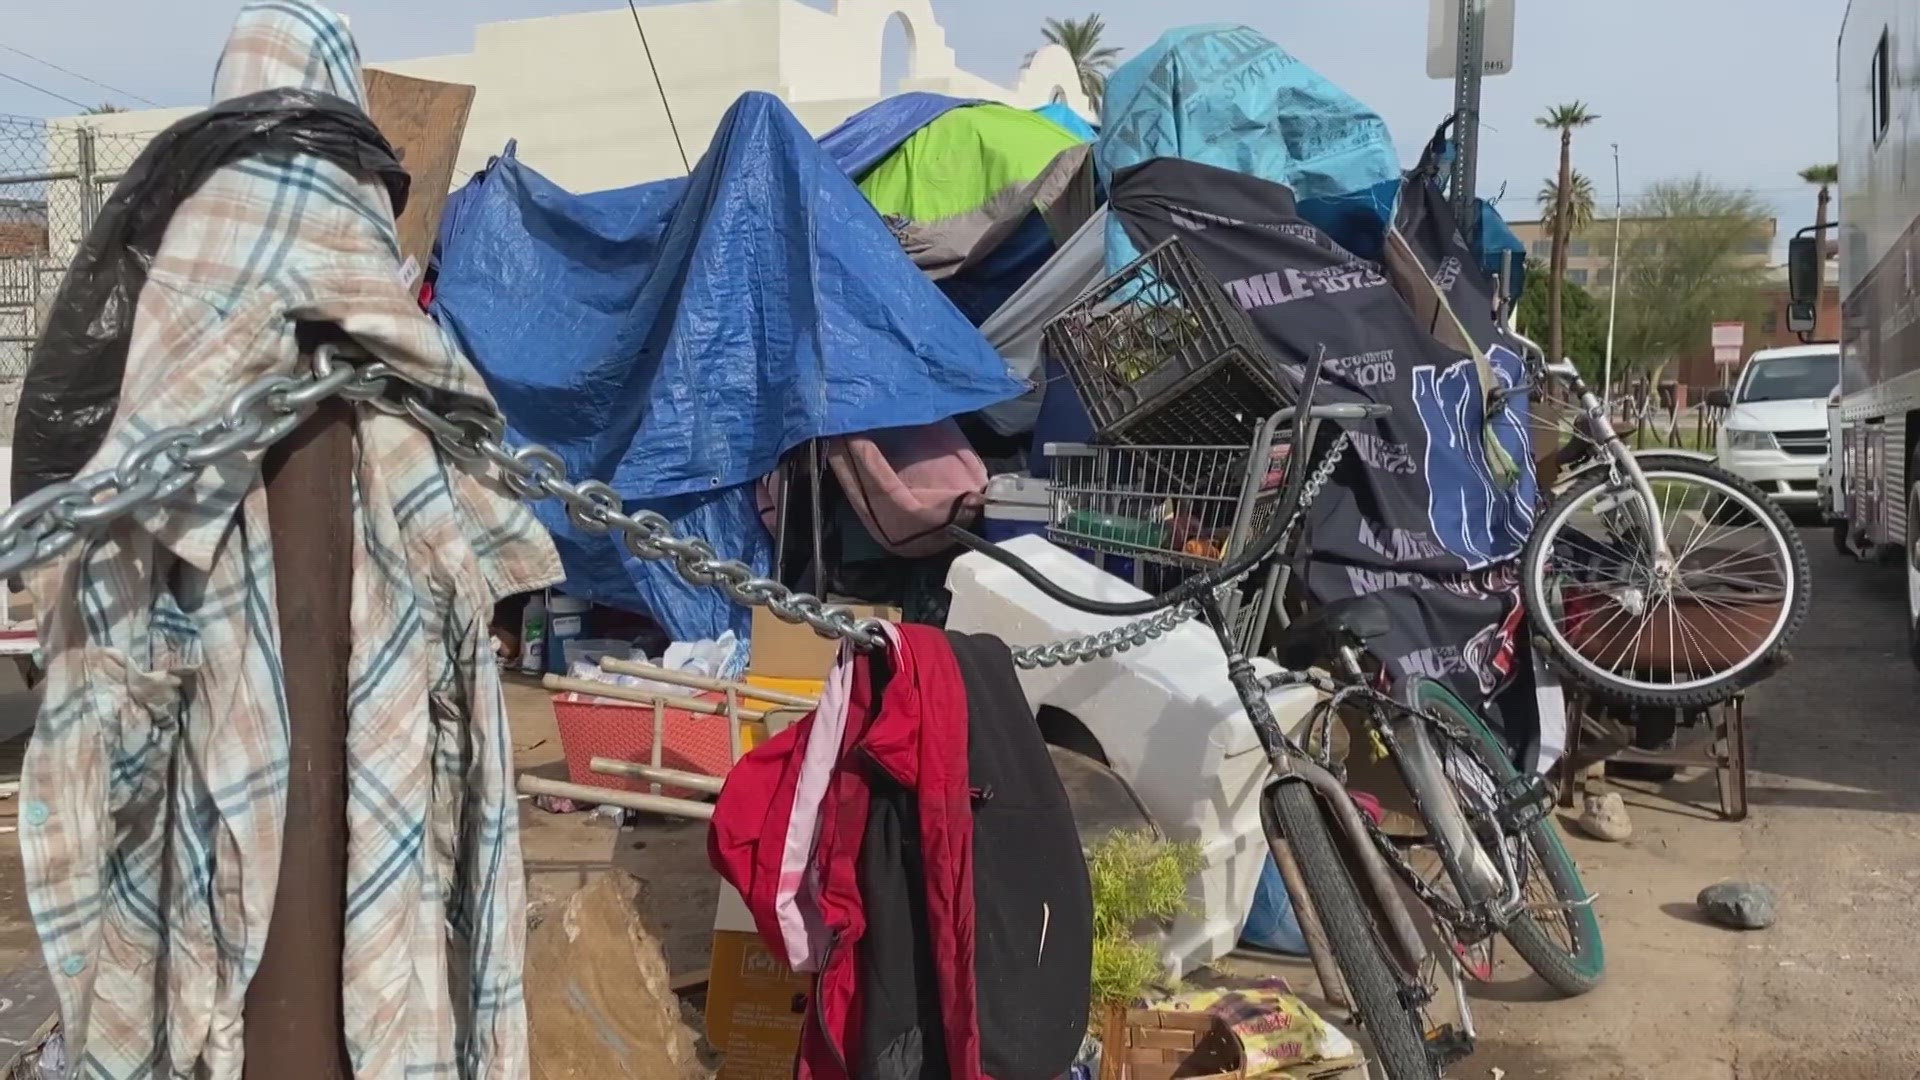 City officials say that with the encampment cleanings becoming permanent in 'The Zone,' they are hurrying to find alternate housing solutions.